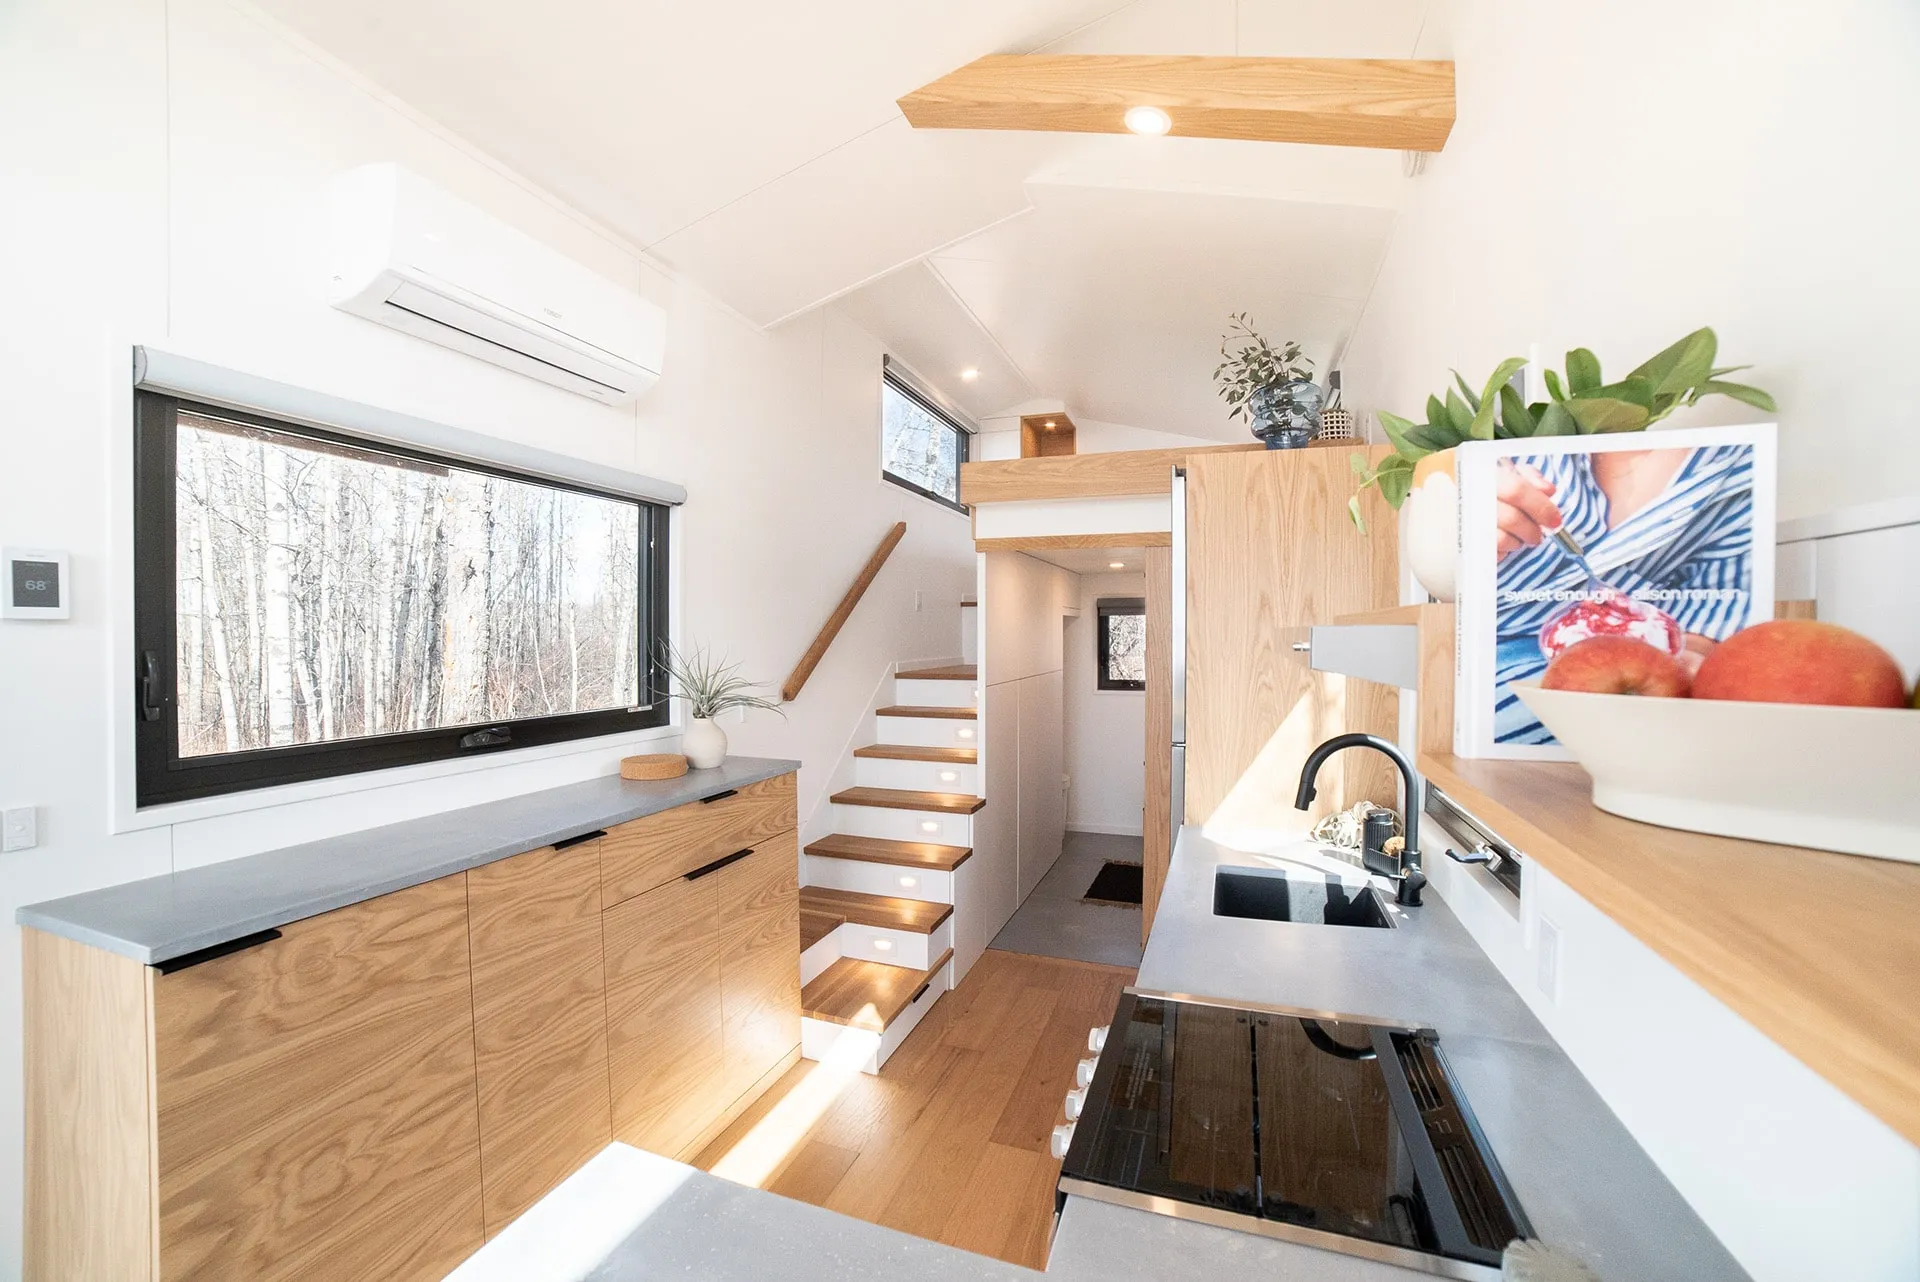 aqua tiny homes interior angled view of main floor with modern kitchen in a small space 